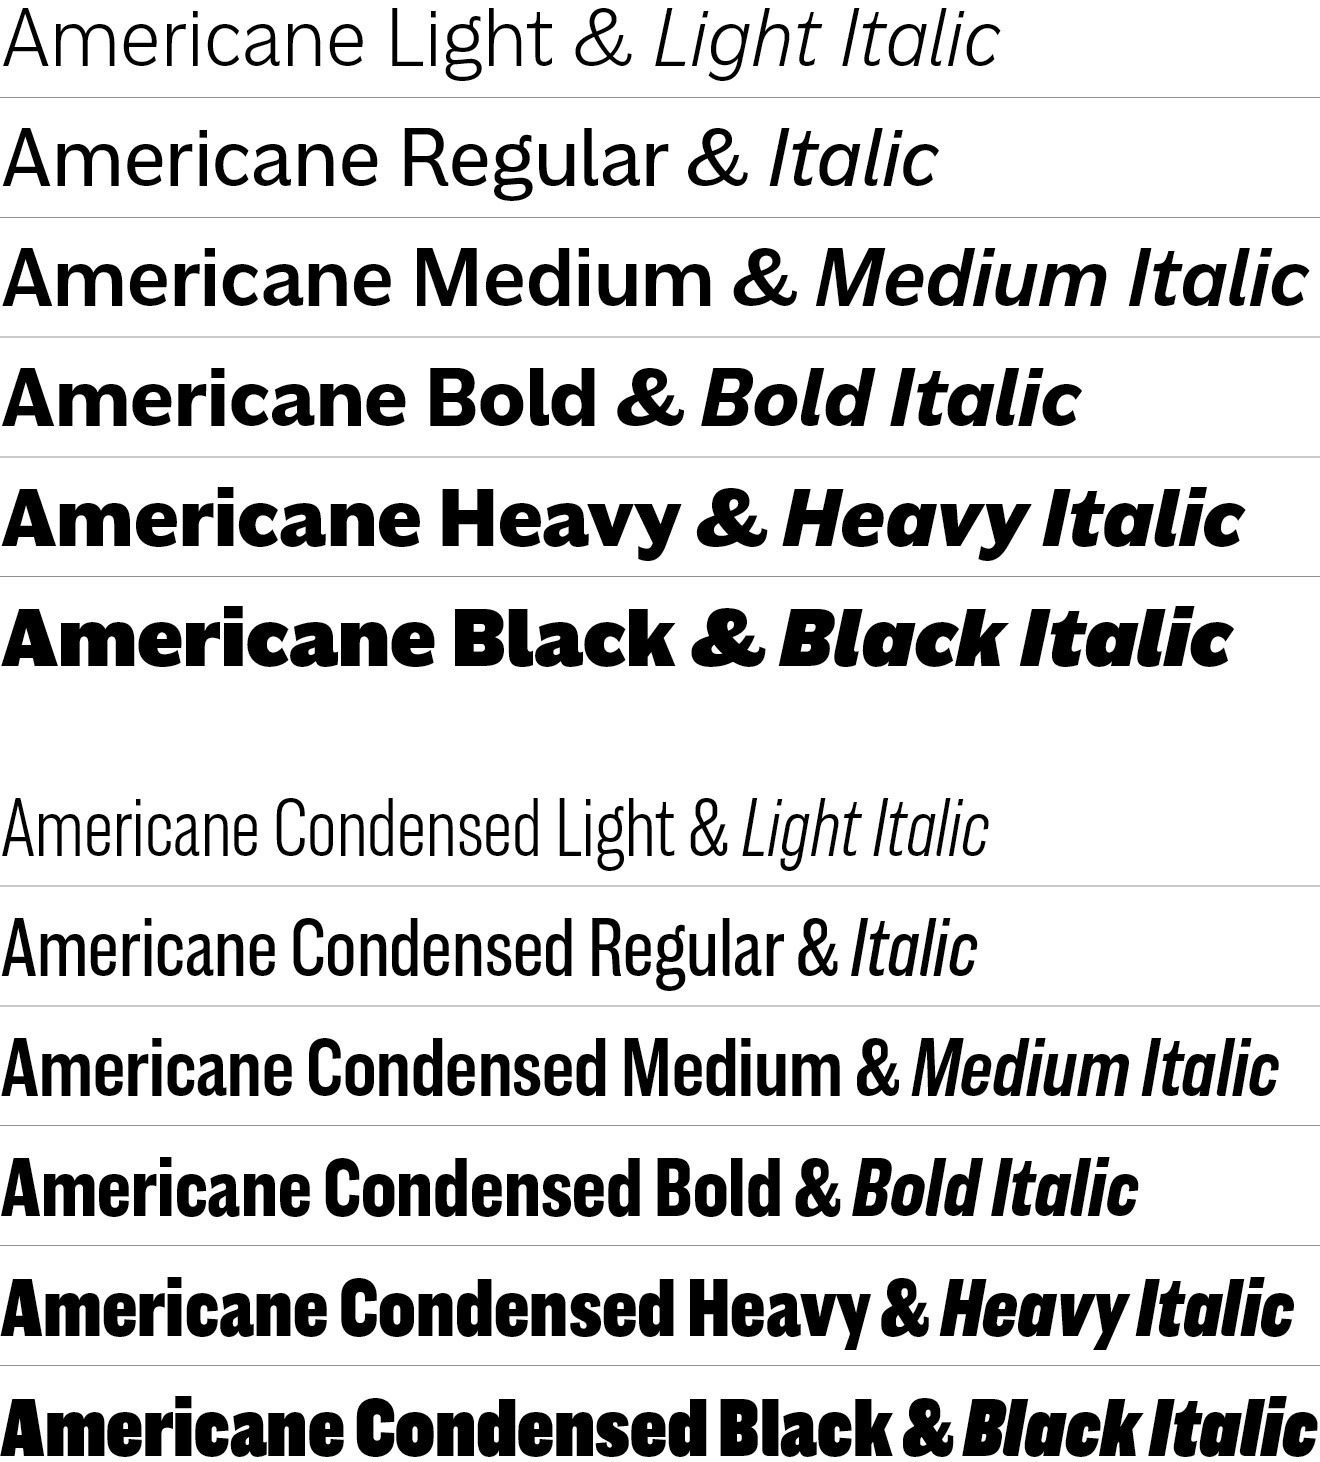 The Americane type system contains 24 Fonts